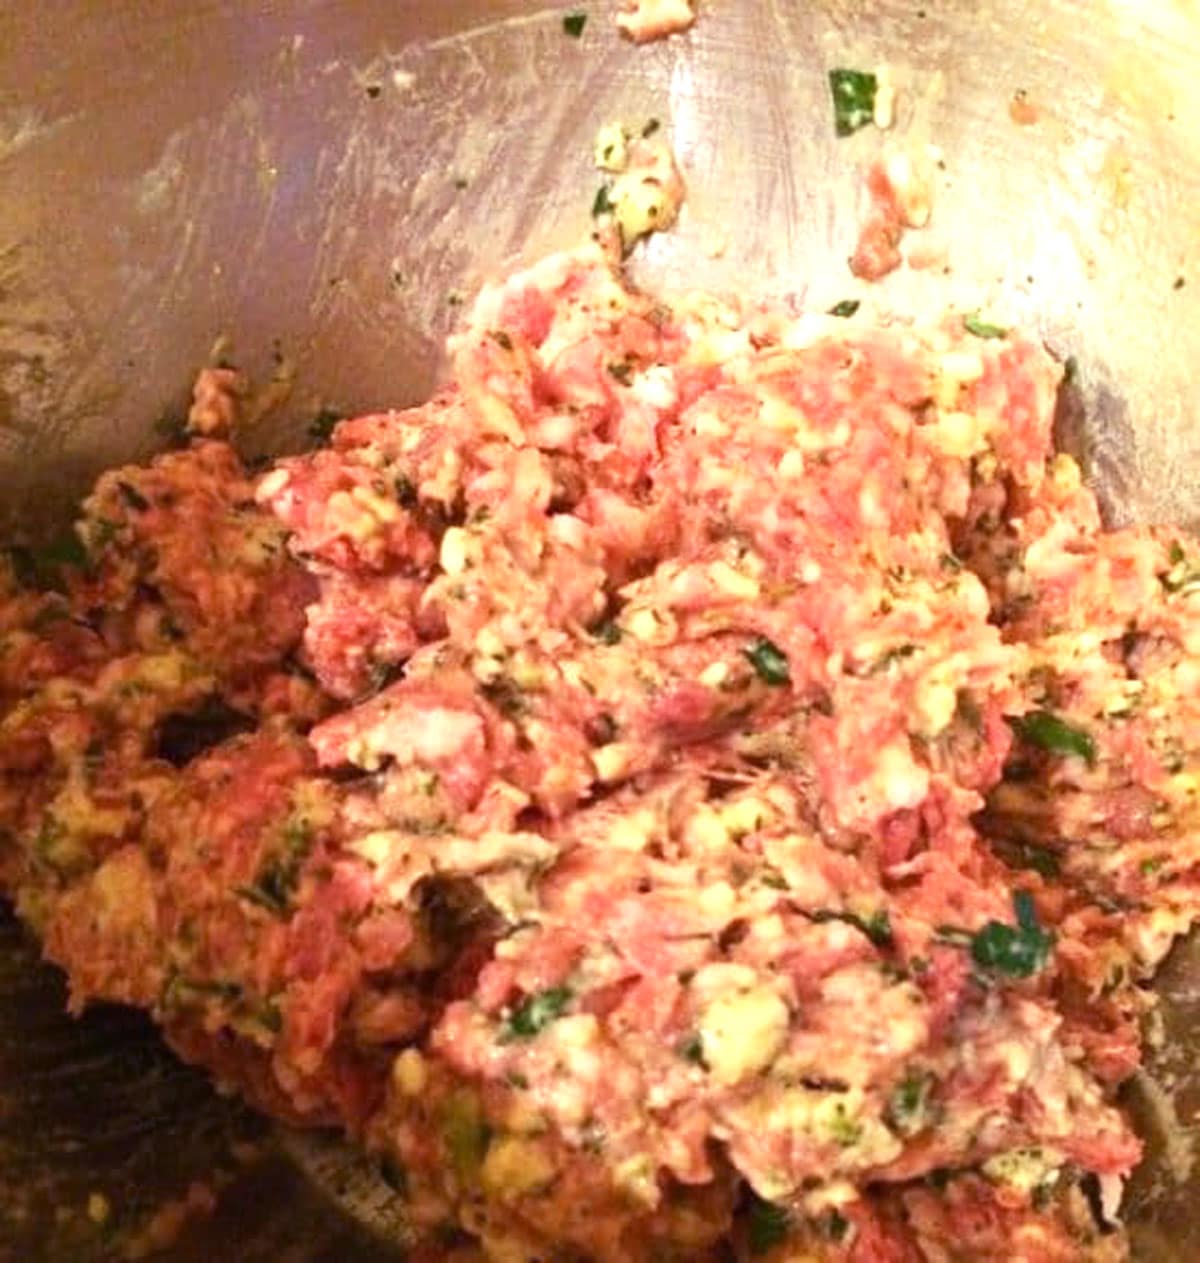 Mixed meat mixture in a bowl.